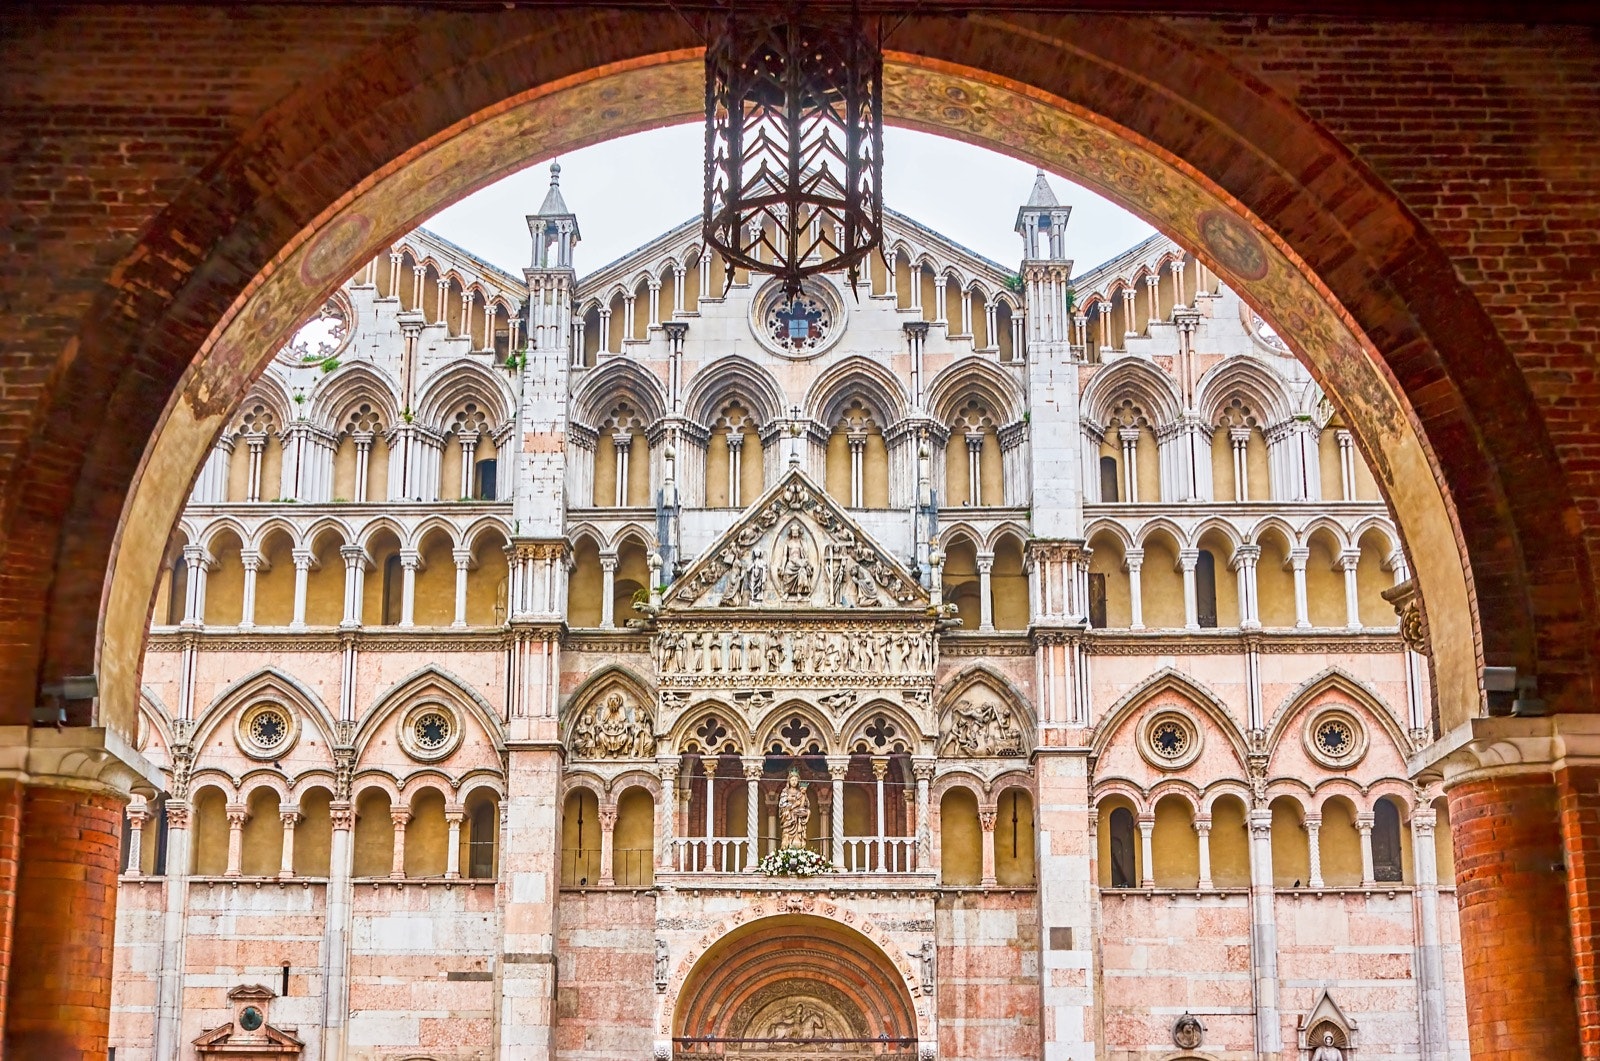 A detailed facade of an old cathedral